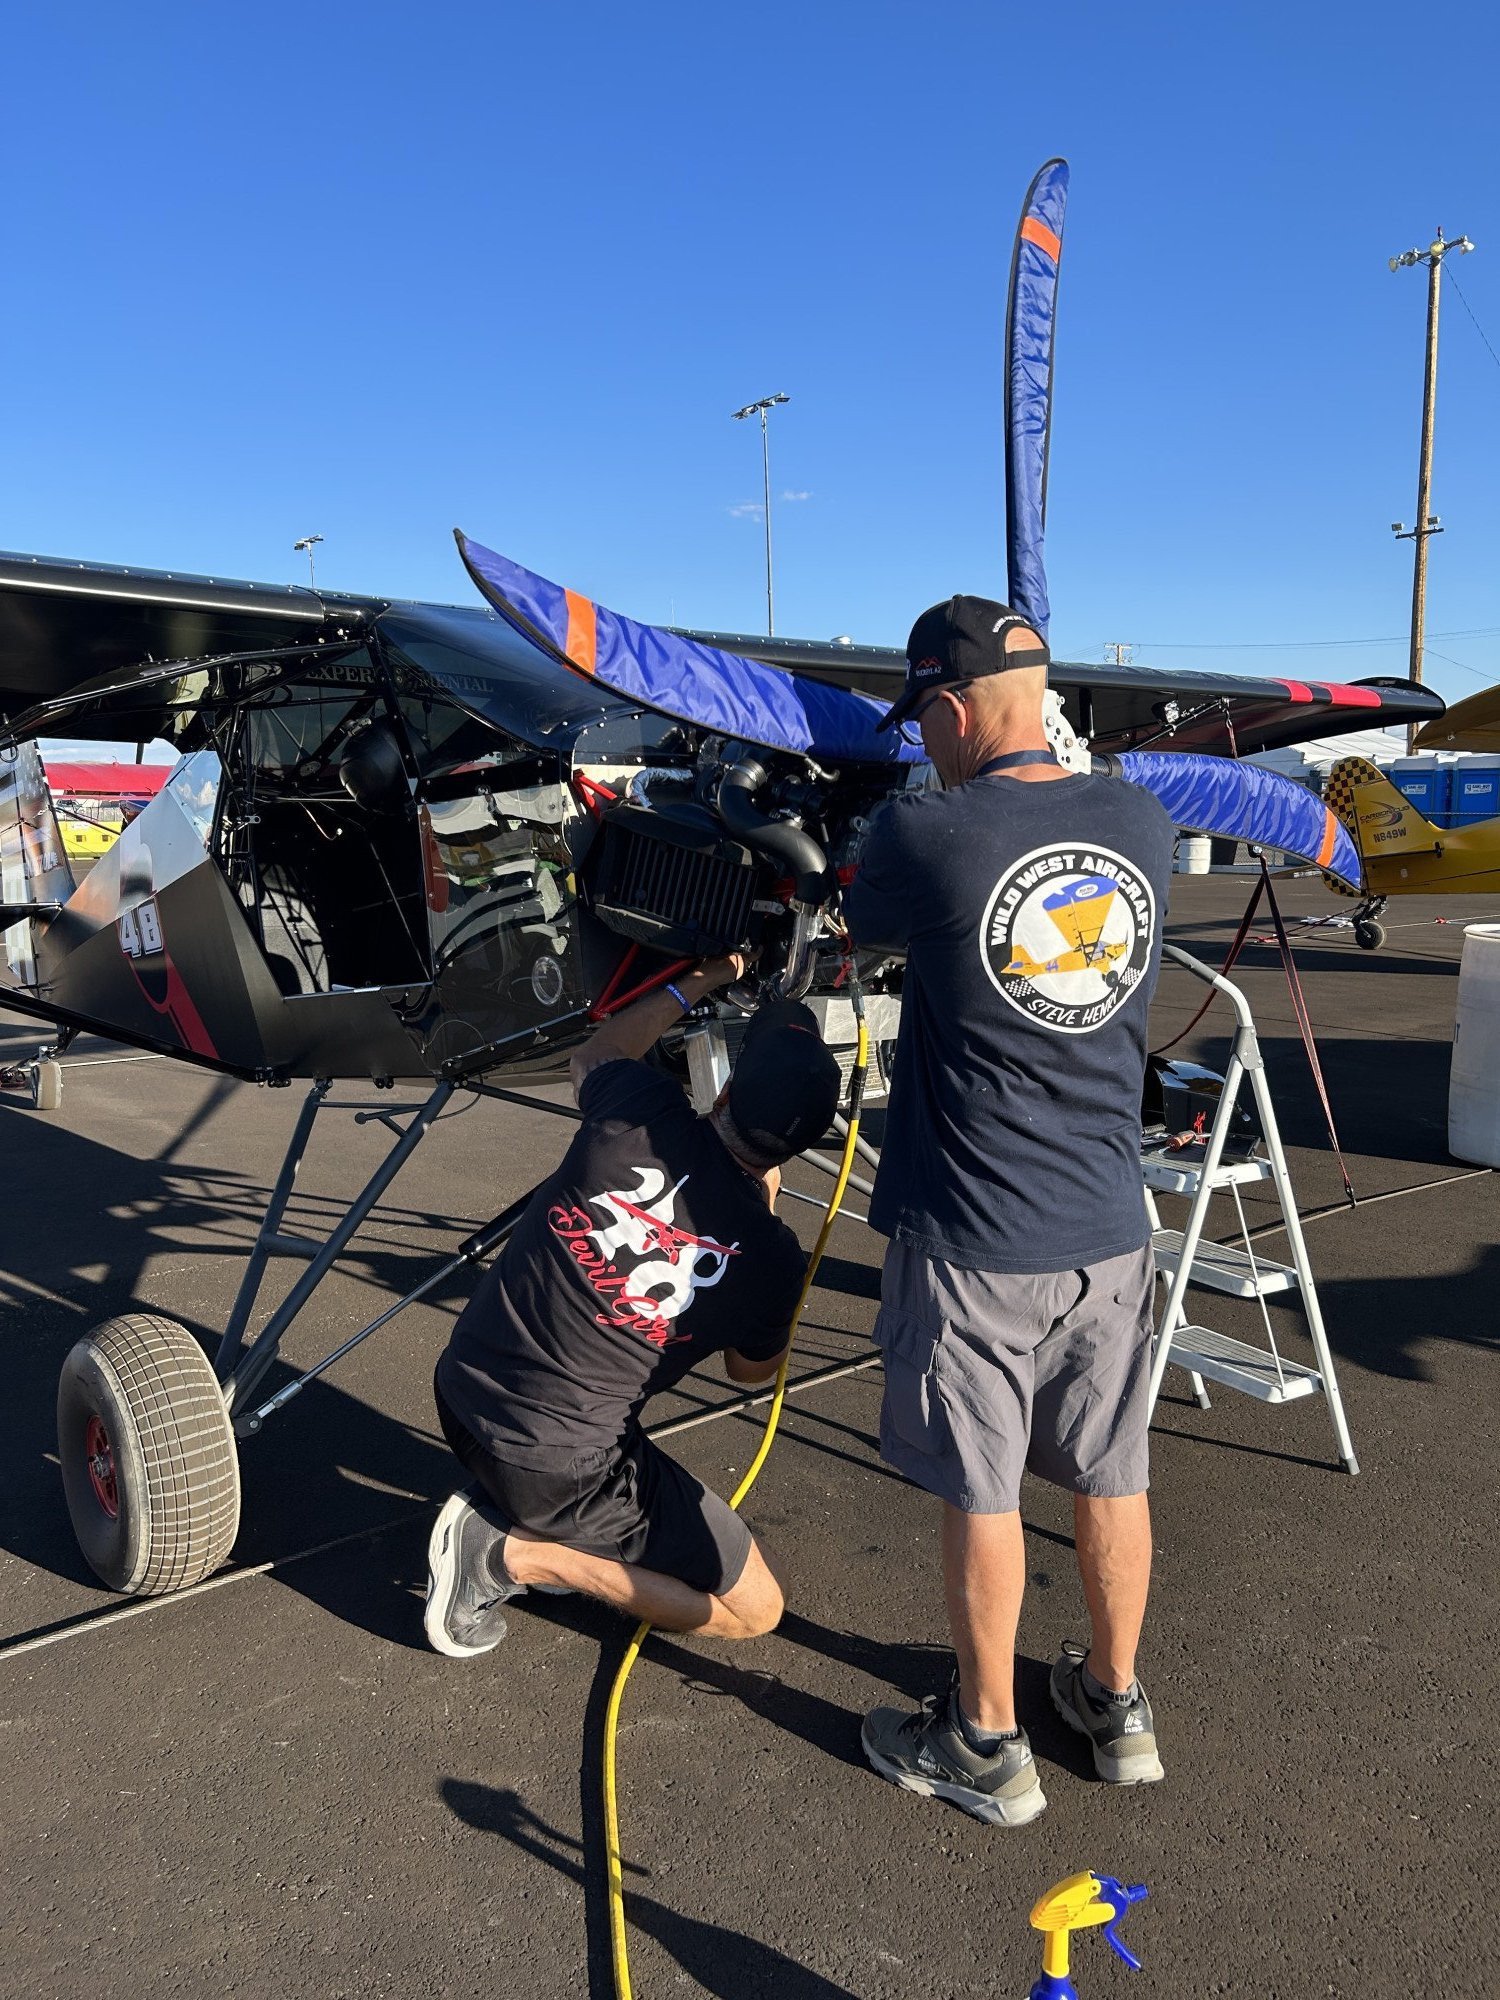 Steve Henry helps Eddie Sanches dial in his airplane for the first practice runs of the event.